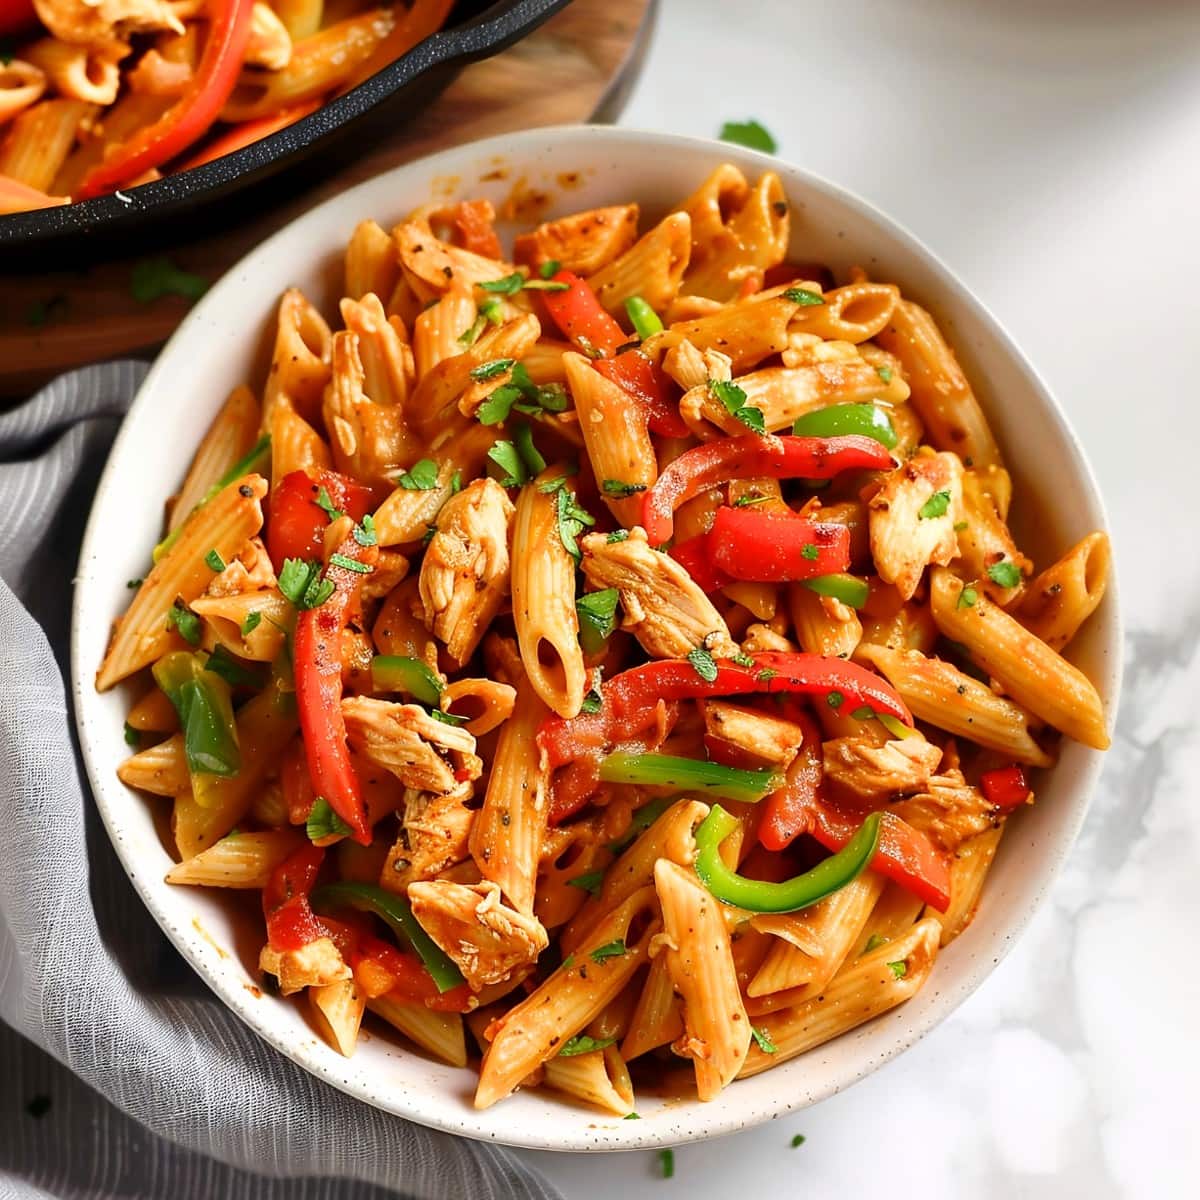 Chicken fajita penne pasta with colorful bell peppers and cilantro in a bowl